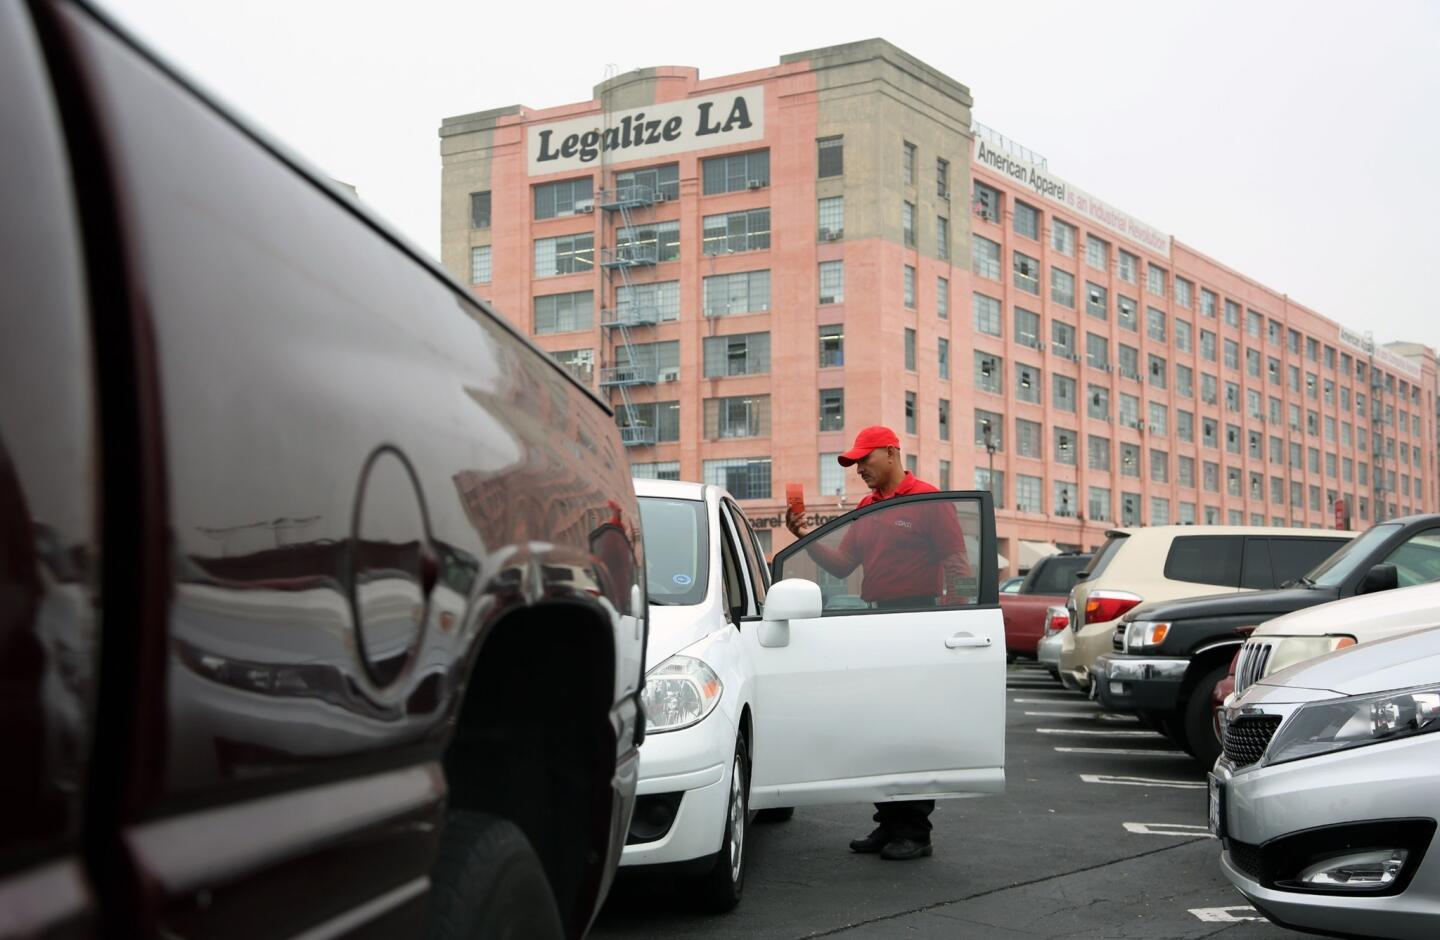 In 2013, American Apparel, which has thousands of workers, hired a valet service to park employees' cars because of rapid development near the factory in downtown Los Angeles.